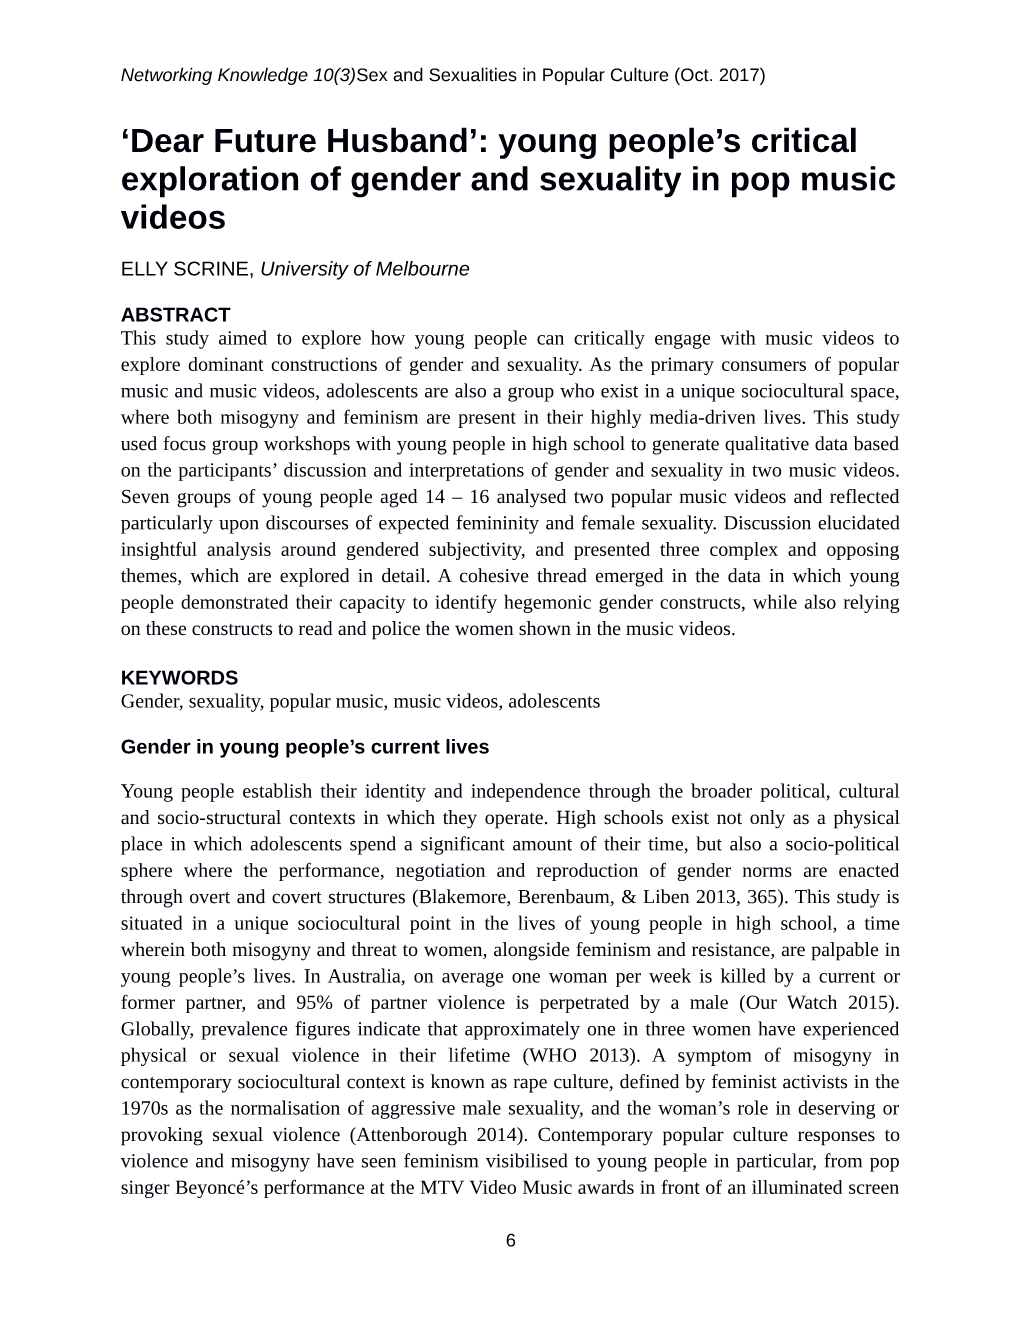 Dear Future Husband’: Young People’S Critical Exploration of Gender and Sexuality in Pop Music Videos